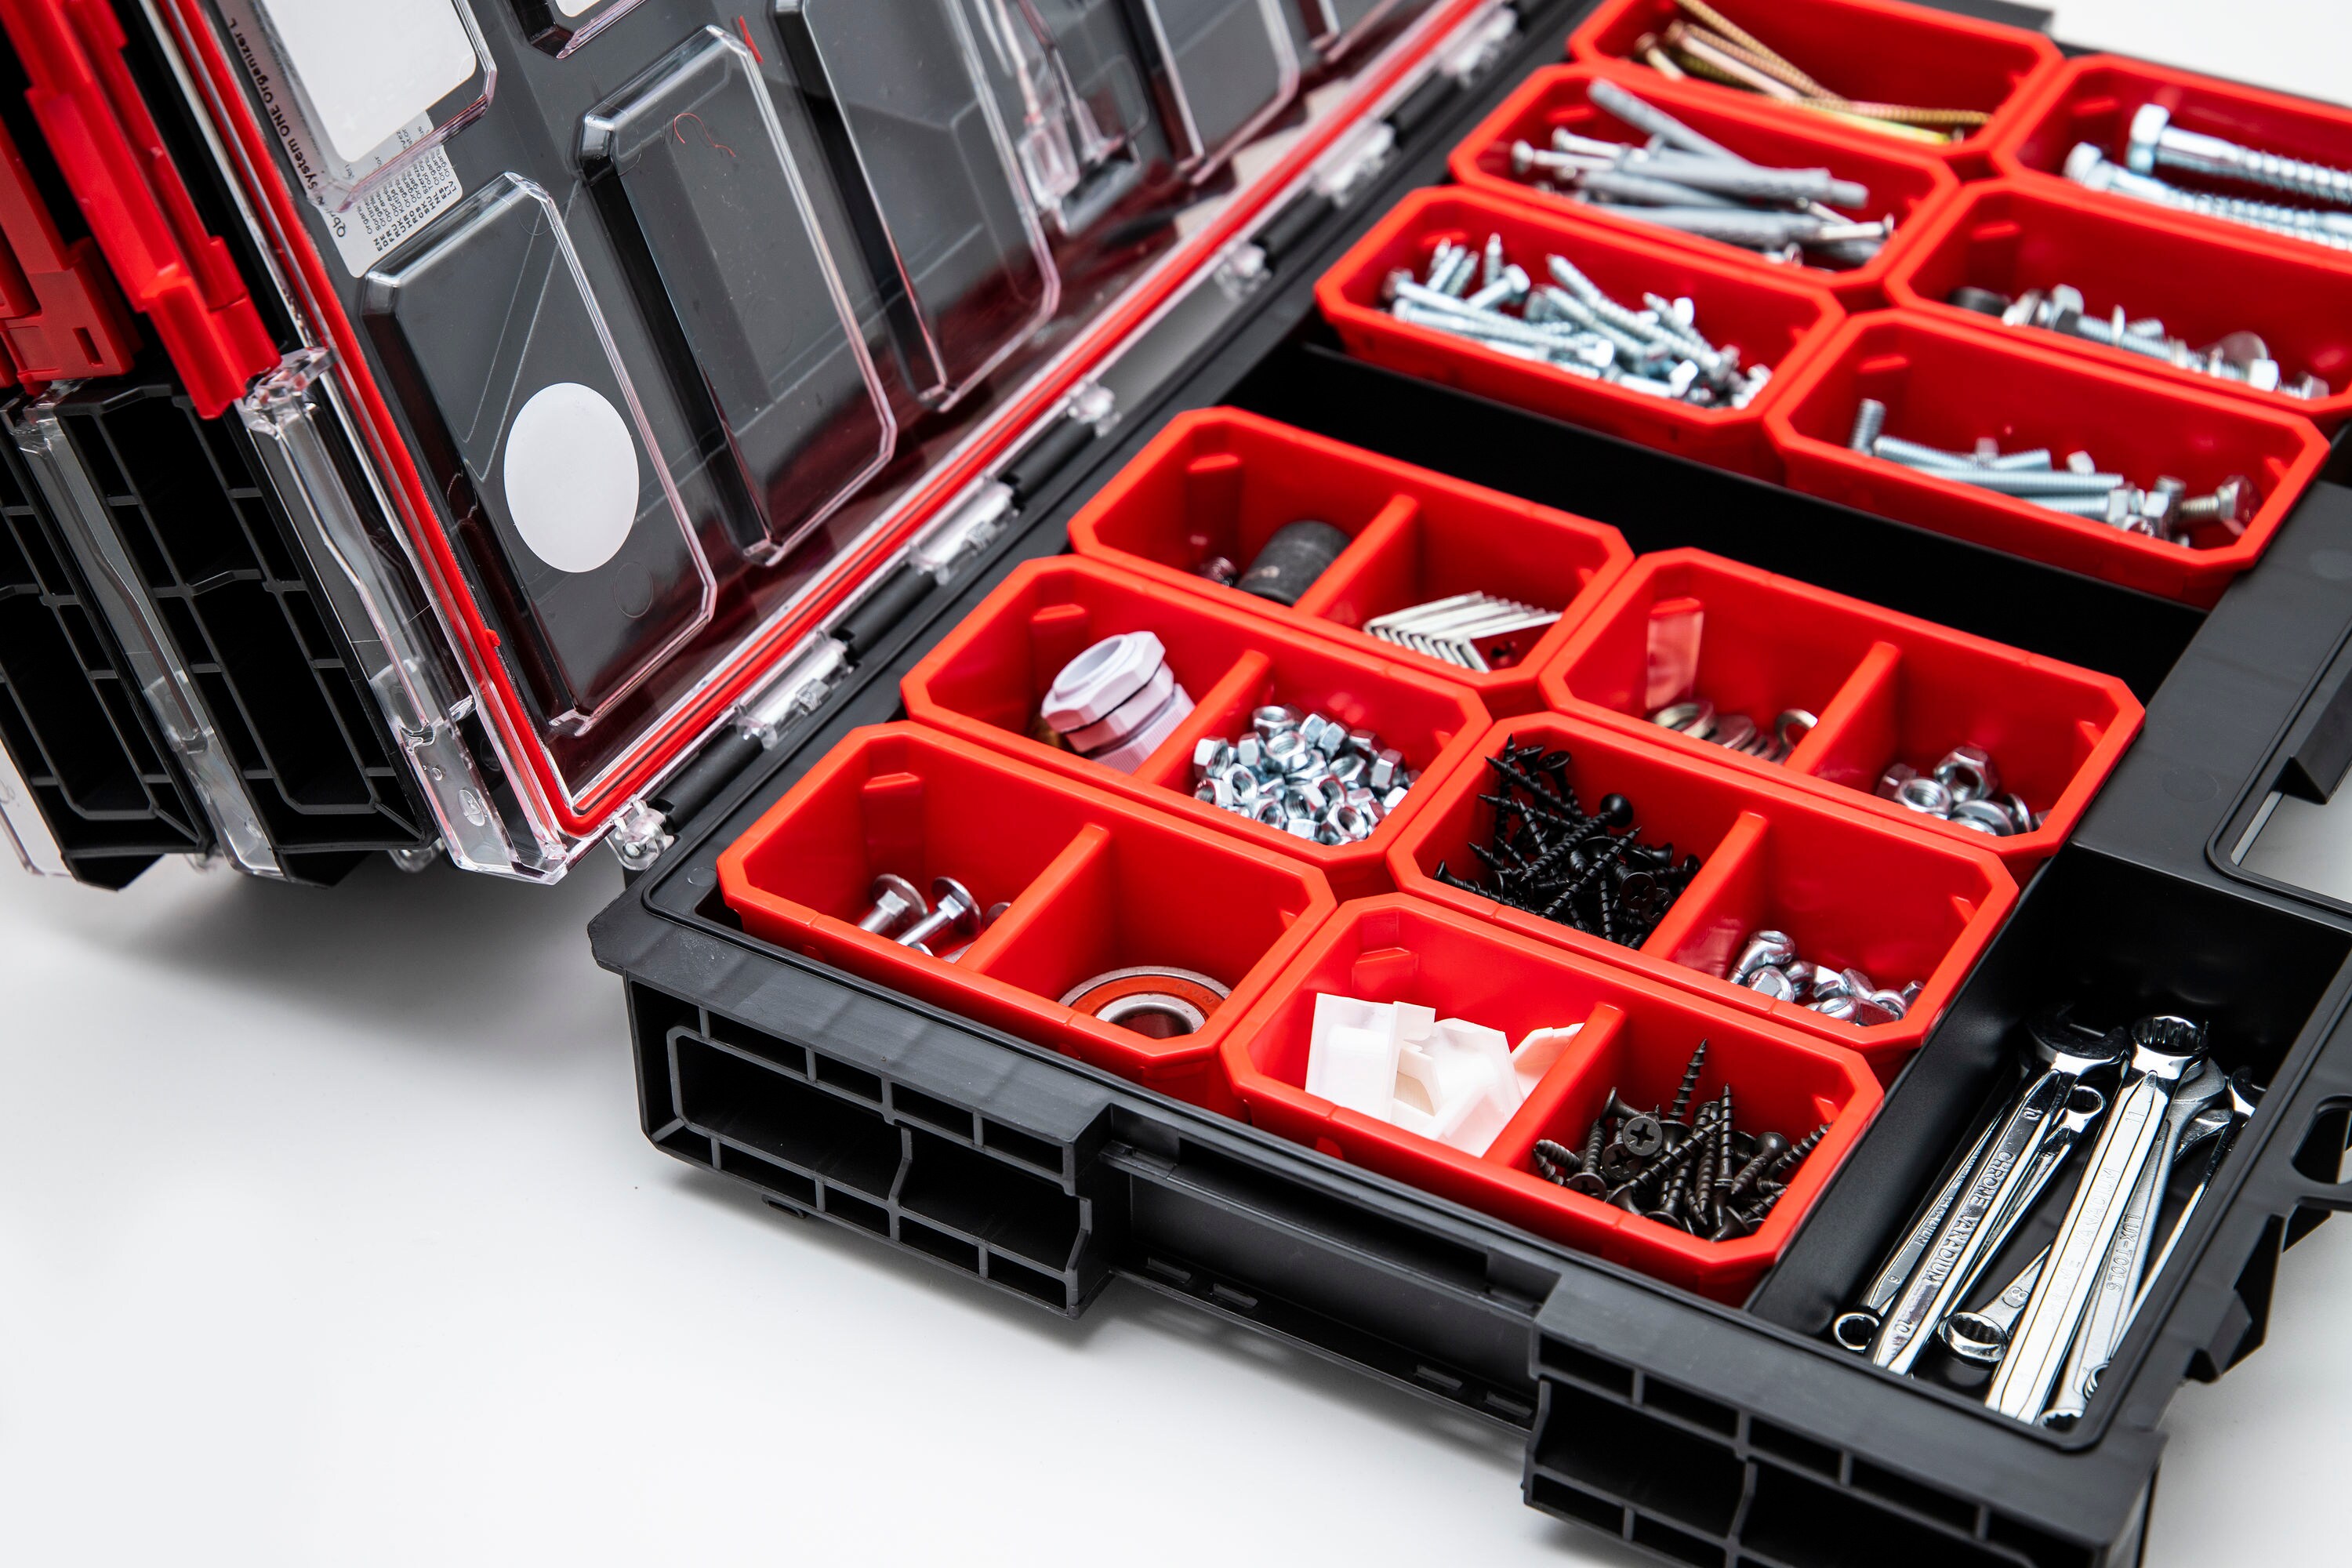 Organizer Qbrick department L SYSTEM System in the Parts ONE at QBRICK Organizers Small